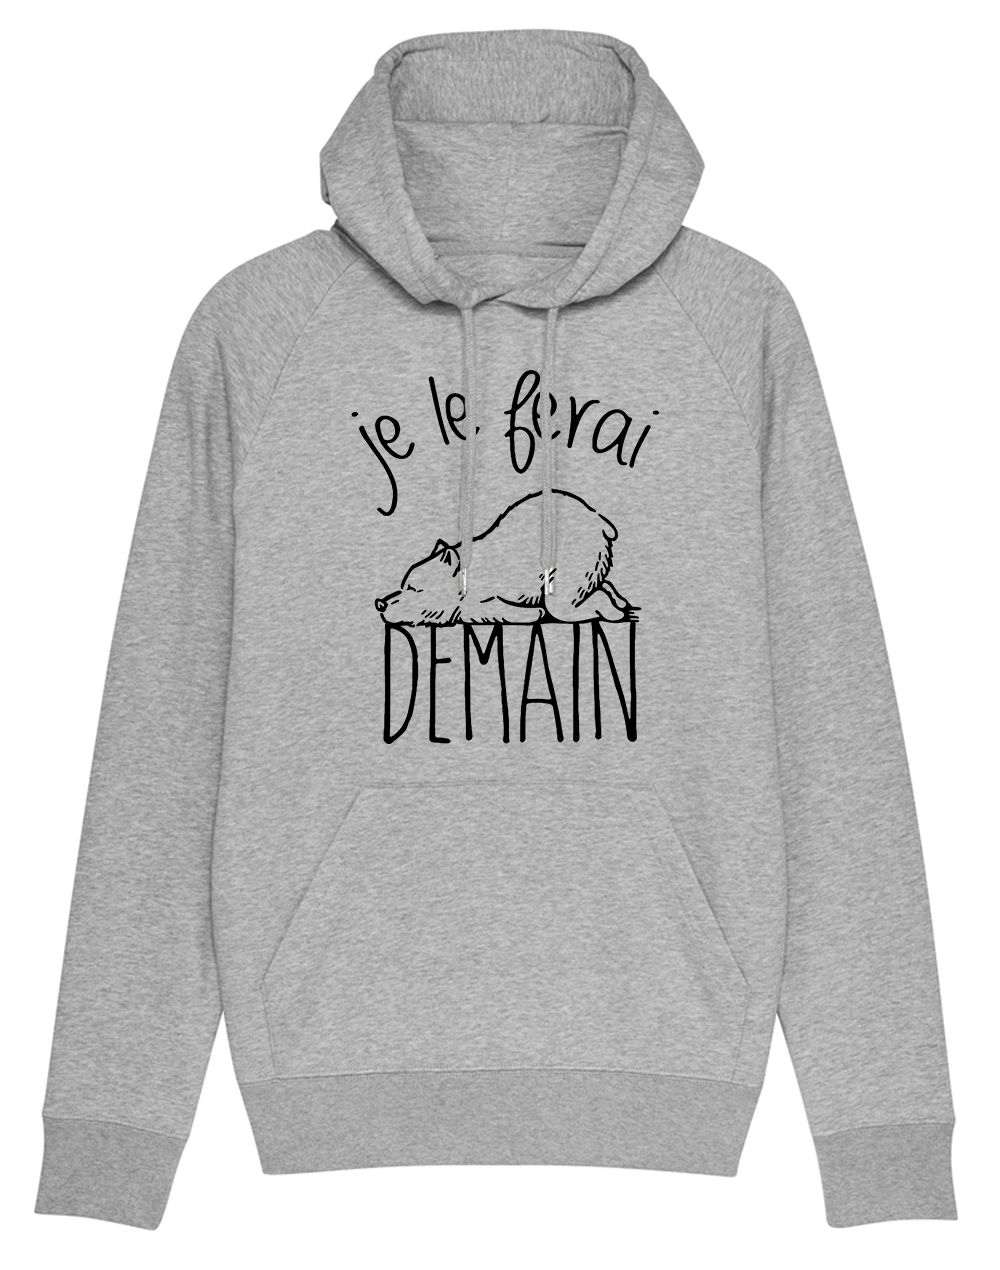 Sweat capuche "demain ours"